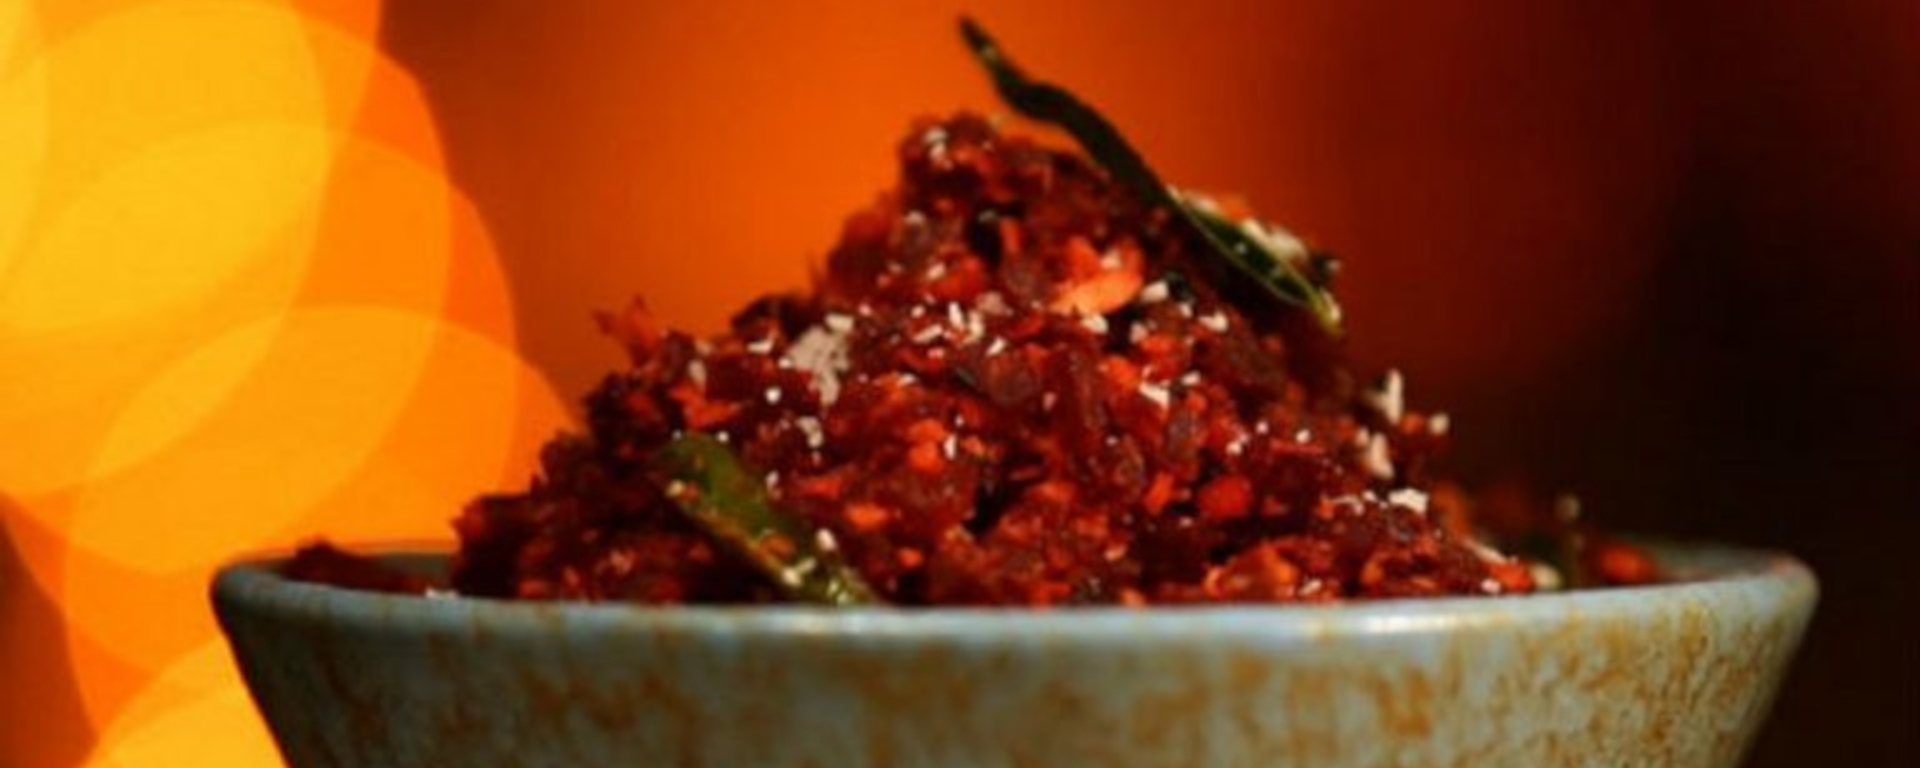 LuvMyRecipe.com - South Indian Kitchen: Beetroot Poriyal Featured